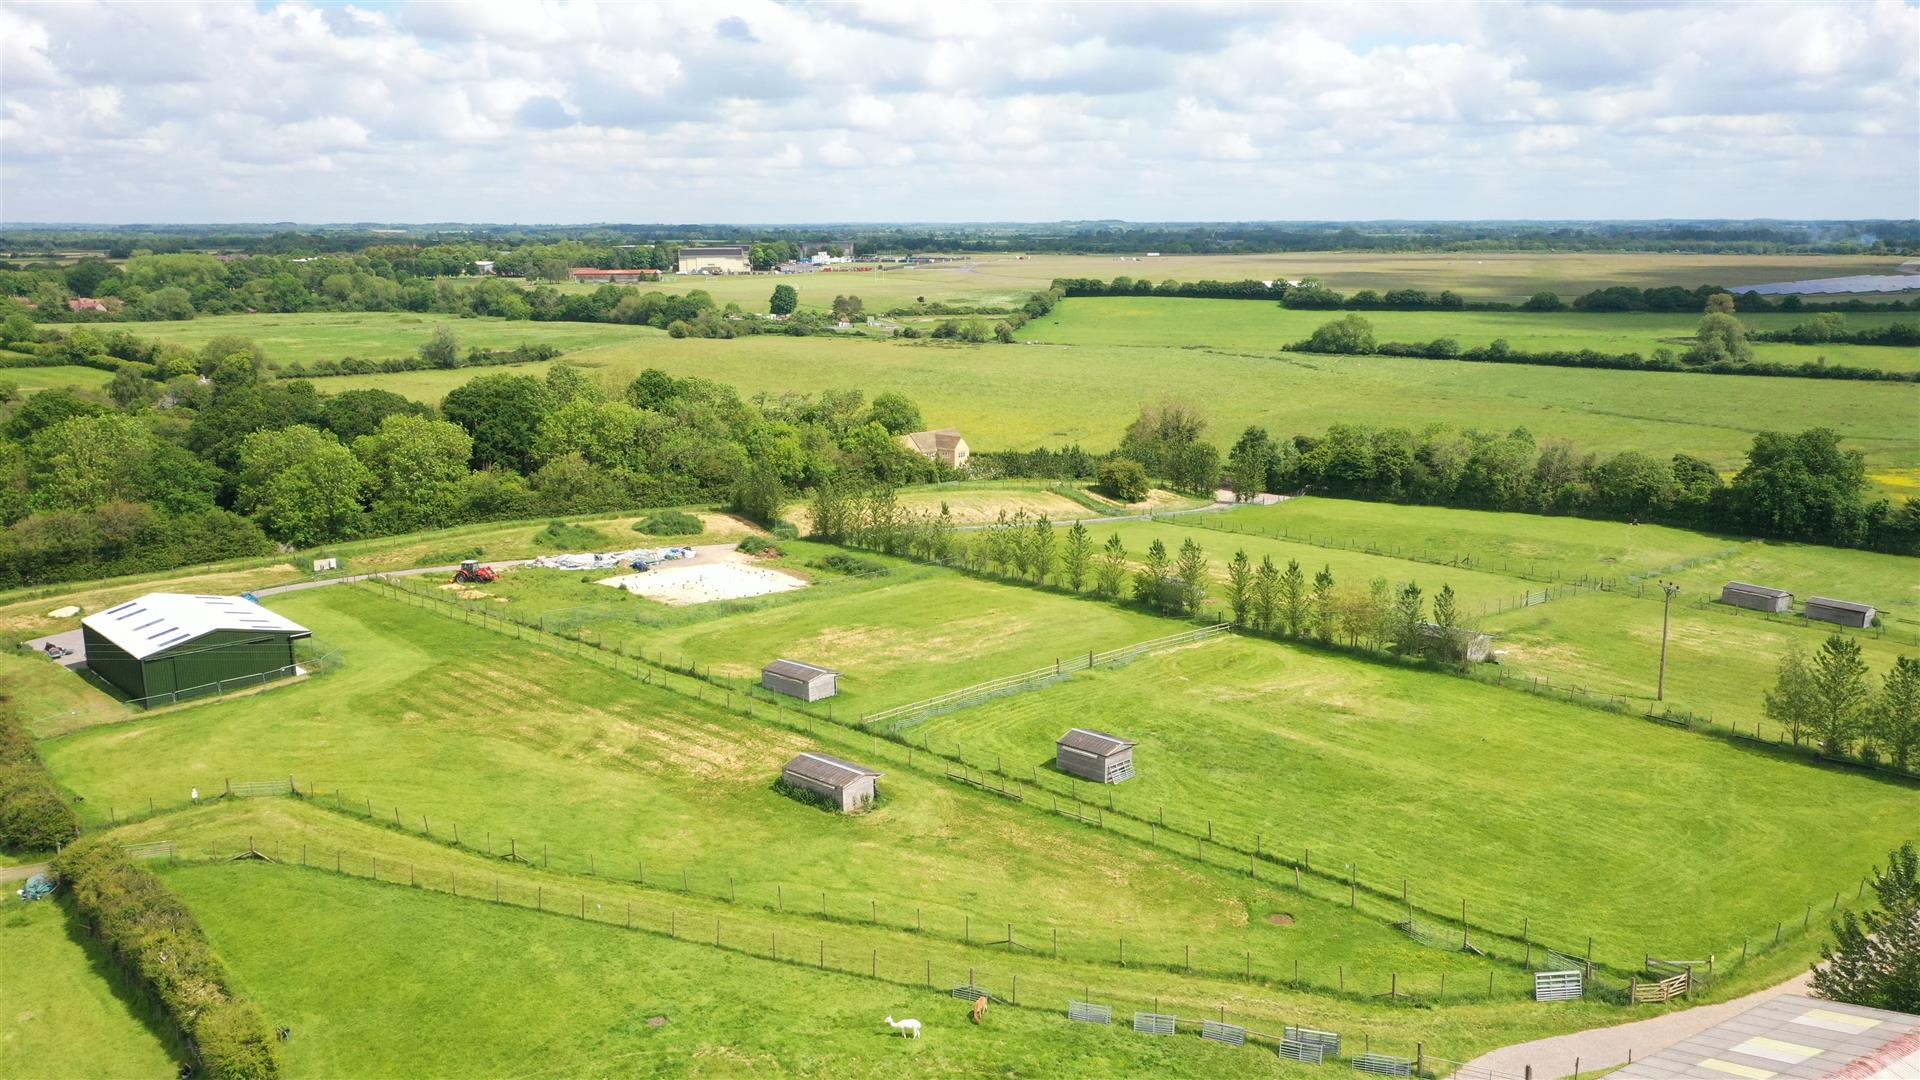 Building Plot, Barn & 4.5 Acres, Cirencester Road, South Cerney, Cirencester